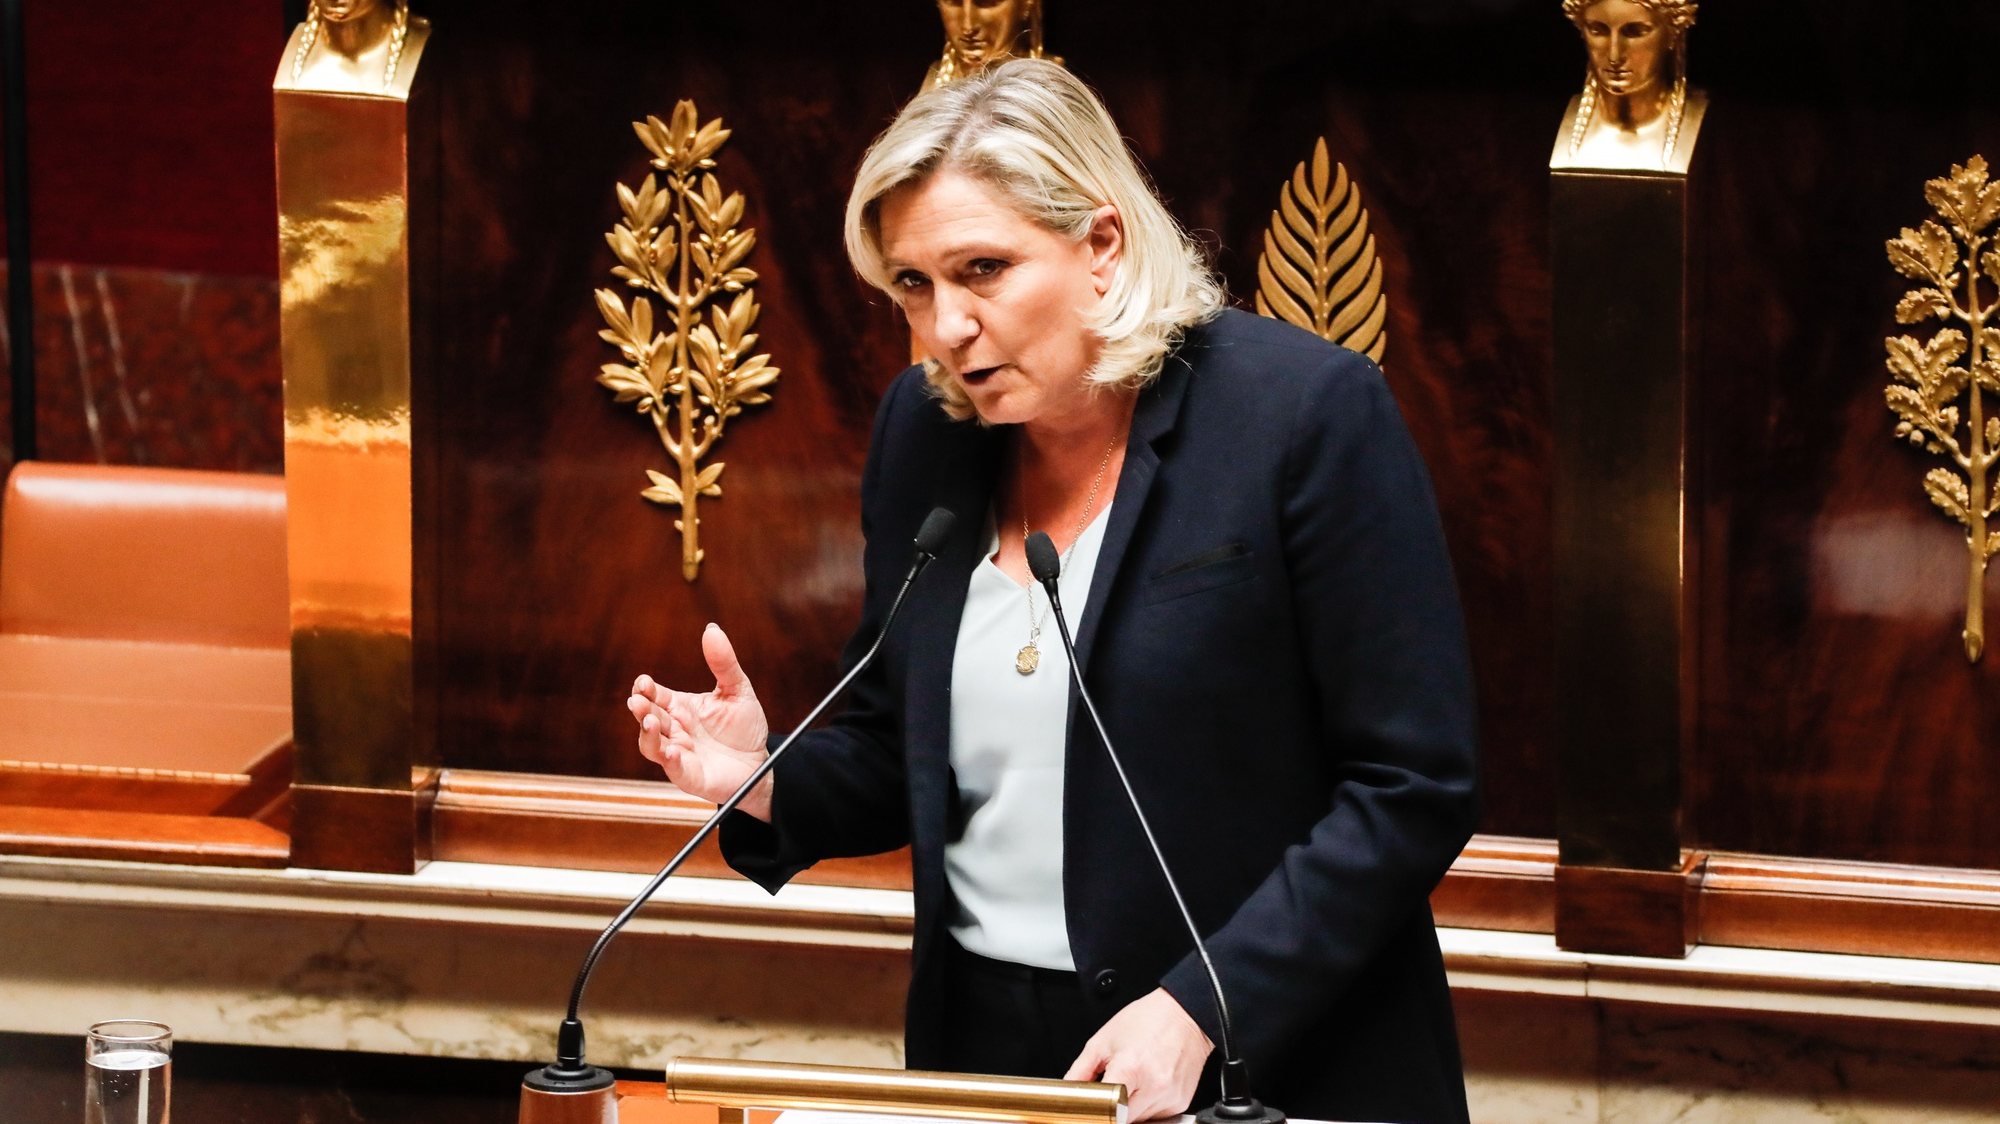 epa10263427 President of RN (Rassemblement National) Marine Le Pen gives an speech at the National Assembly during the examination of two motions of no-confidence against the government in Paris, France, 24 October 2022. The left-wing parliamentary groups of the &#039;Nupes&#039; coalition (New Popular Ecological and Social Union) and far right-wing deputies of RN (Rassemblement National) have tabled each one a motion of censure against the government of Prime Minister Elisabeth Borne after the application of Article 49 paragraph 3 of the Constitution to vote the state budget.  EPA/TERESA SUAREZ